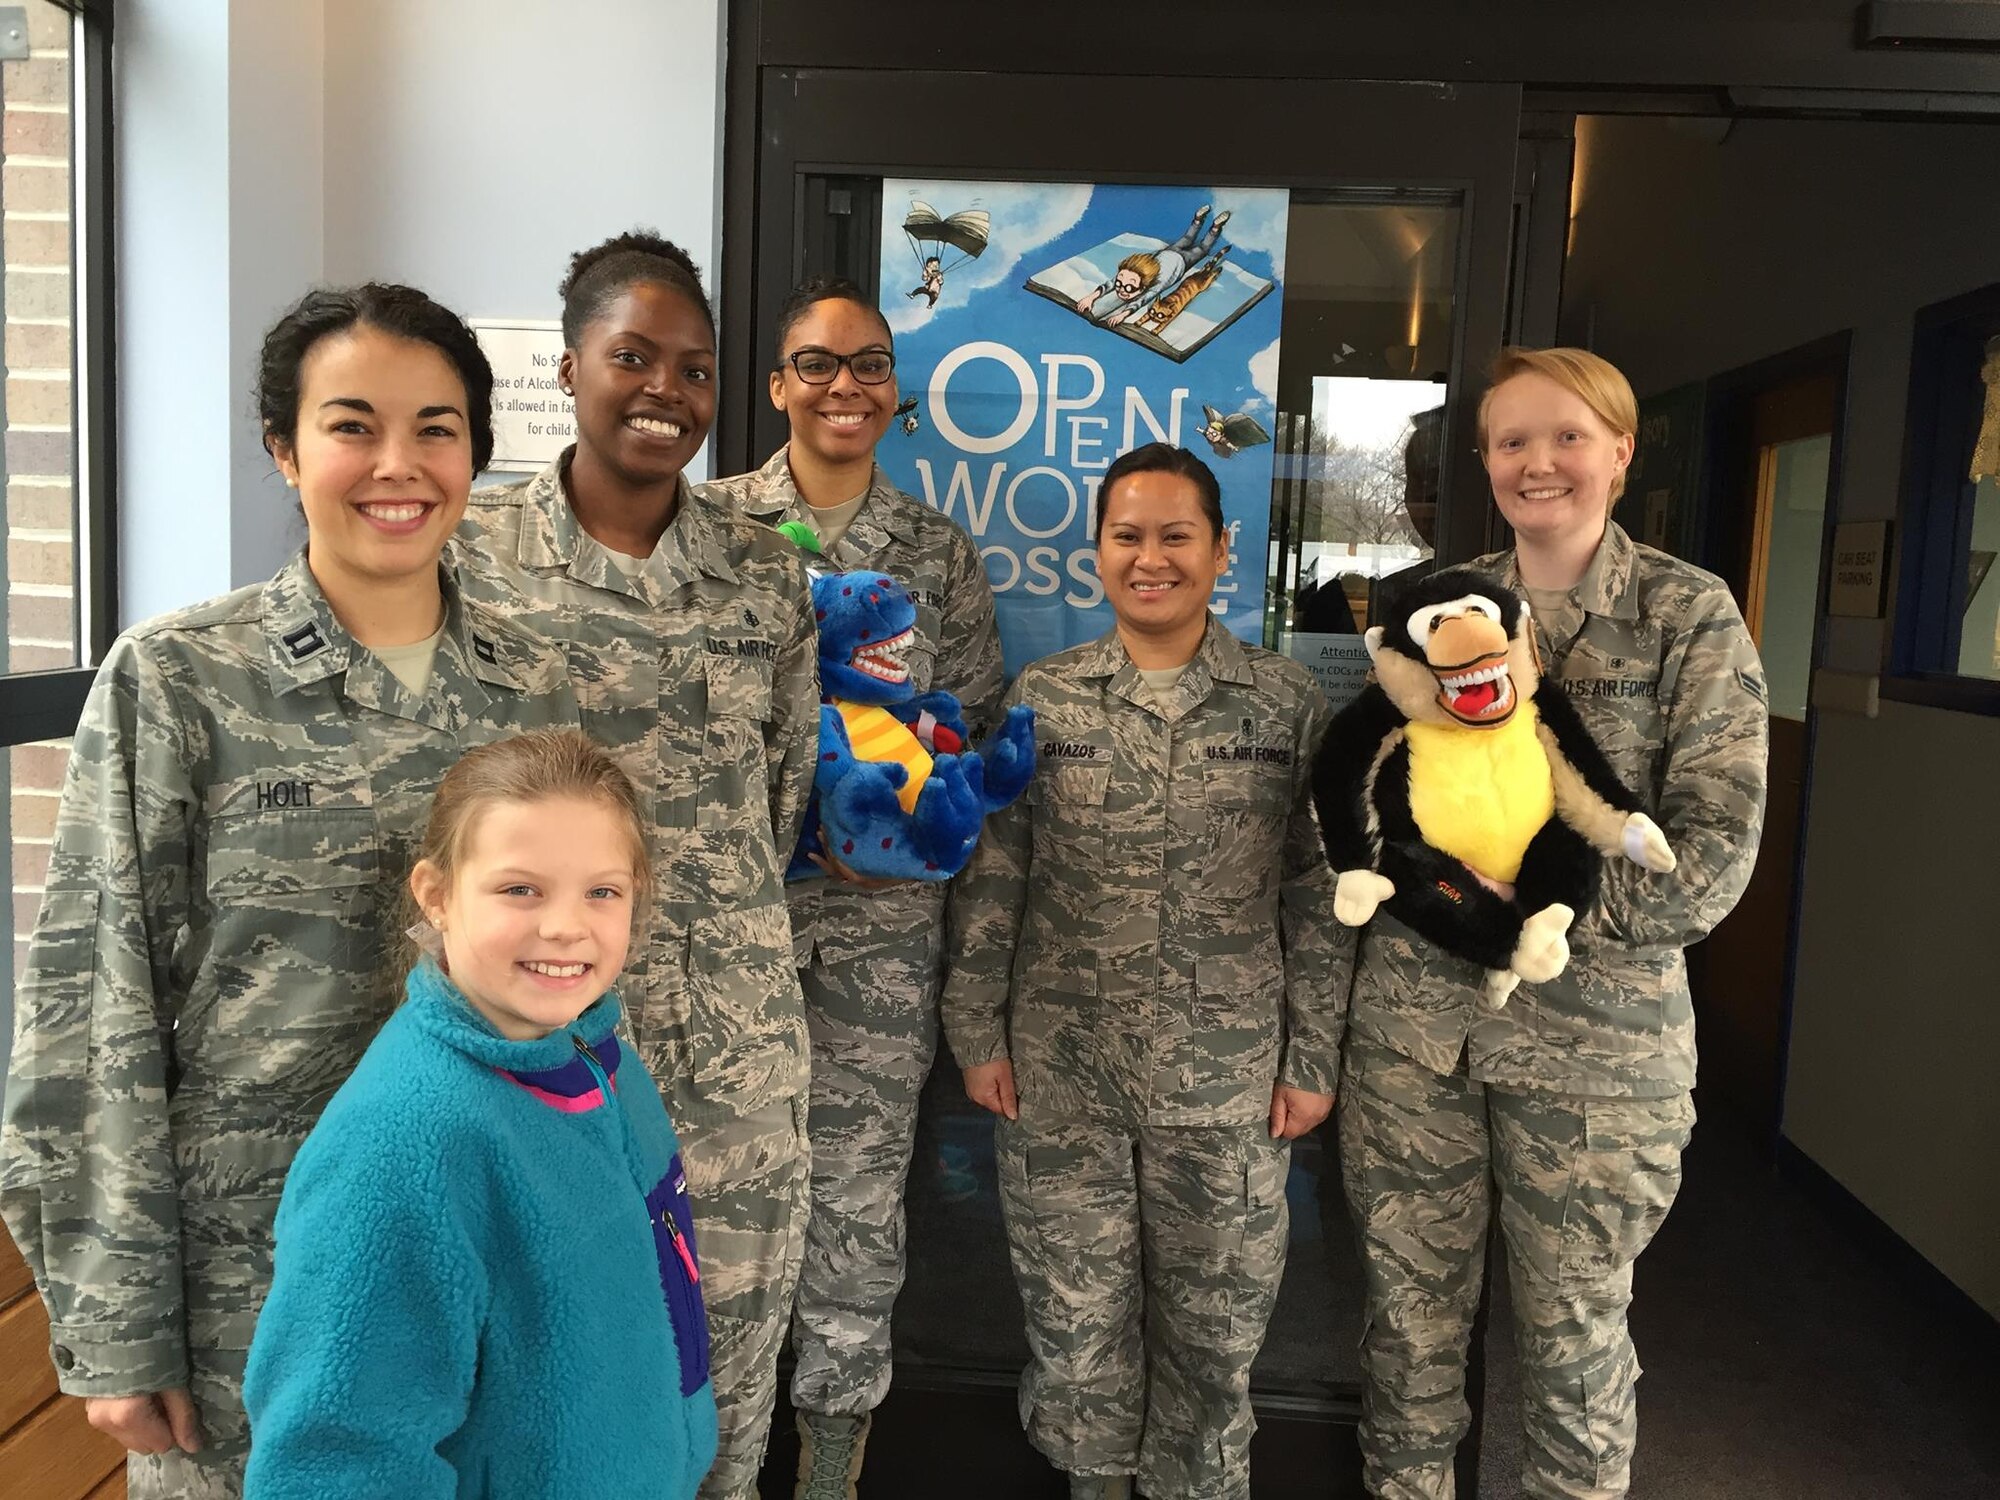 On Feb. 5, members of the Dental Squadron from the 779th Medical Group went to the Child Development Center on Joint Base Andrews to teach the kids about good dental health. From left to right are: Captain (Dr.) Melissa Holt, Air Force dentist and her daughter Samantha; Tech. Sgt. Tina Phelps-Prince, NCOIC for preventive dentistry; Senior Airman Kira Davis, dental technician; Master Sgt. Millicent Cavazos, dental hygienist; and Airman 1st Class Elizabeth Smith, dental assistant. (AF photo by Melanie Moore/Released)

